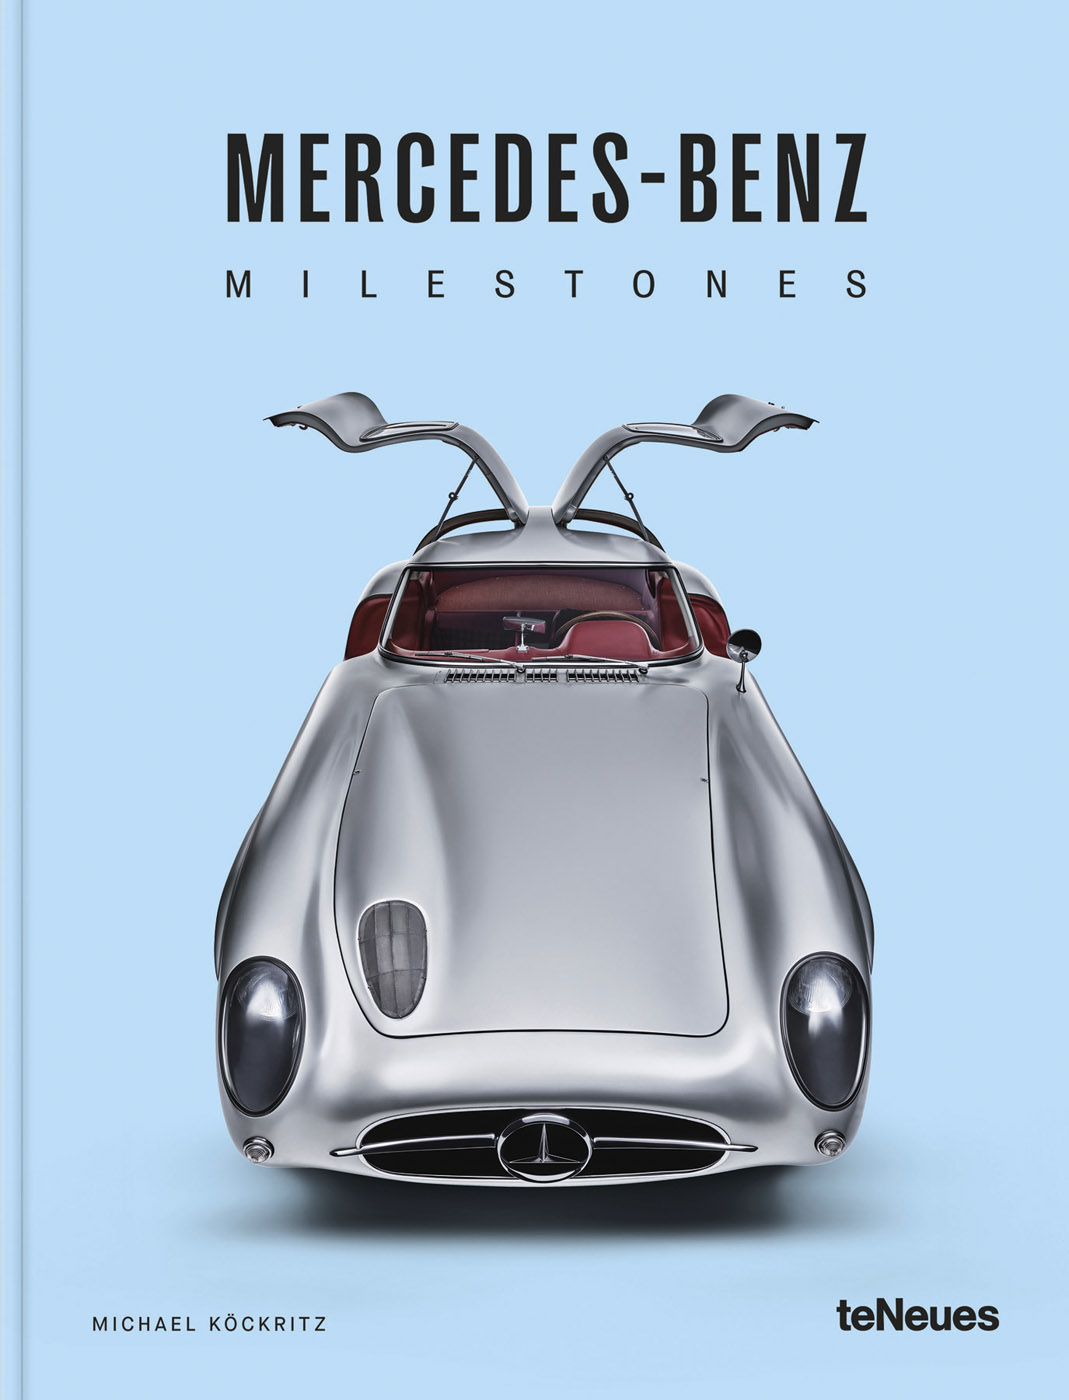 MERCEDES-BENZ - Guide (History of the Automobile) (English Edition